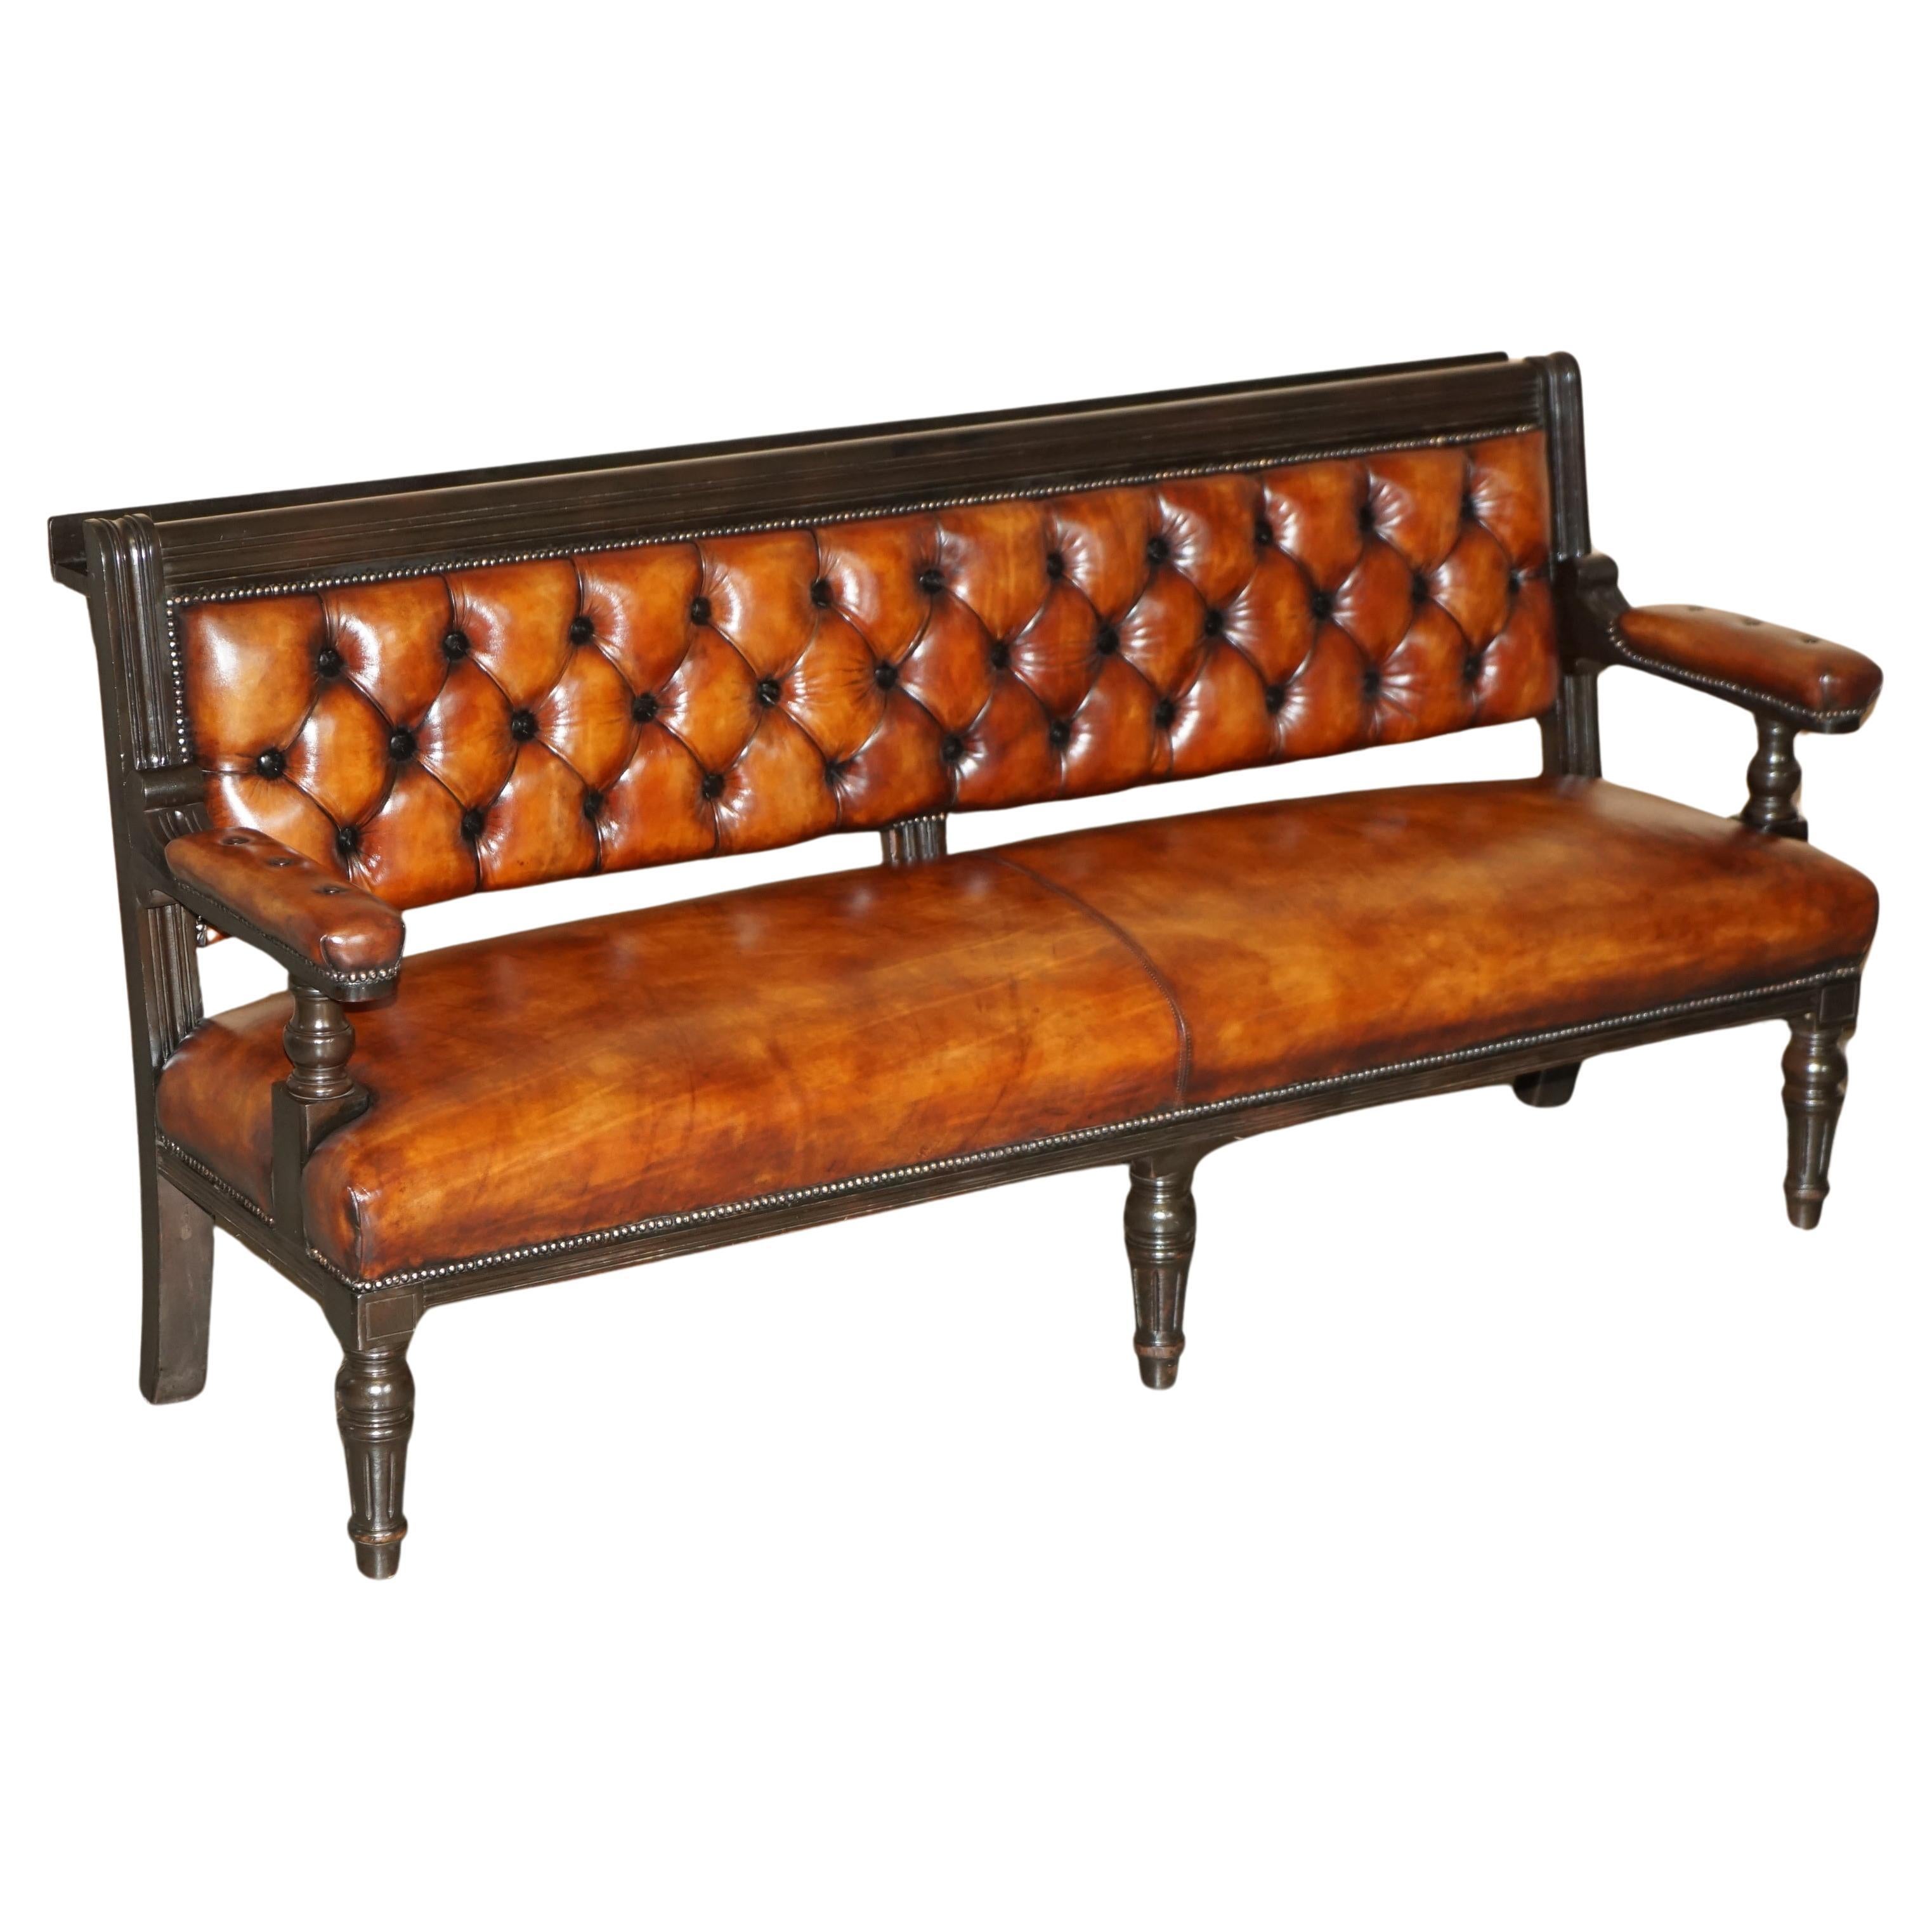 1 OF 4 RESTORED ANTIQUE ViCTORIAN CHESTERFIELD LEATHER SNOOKER HALL PUB BENCHES For Sale